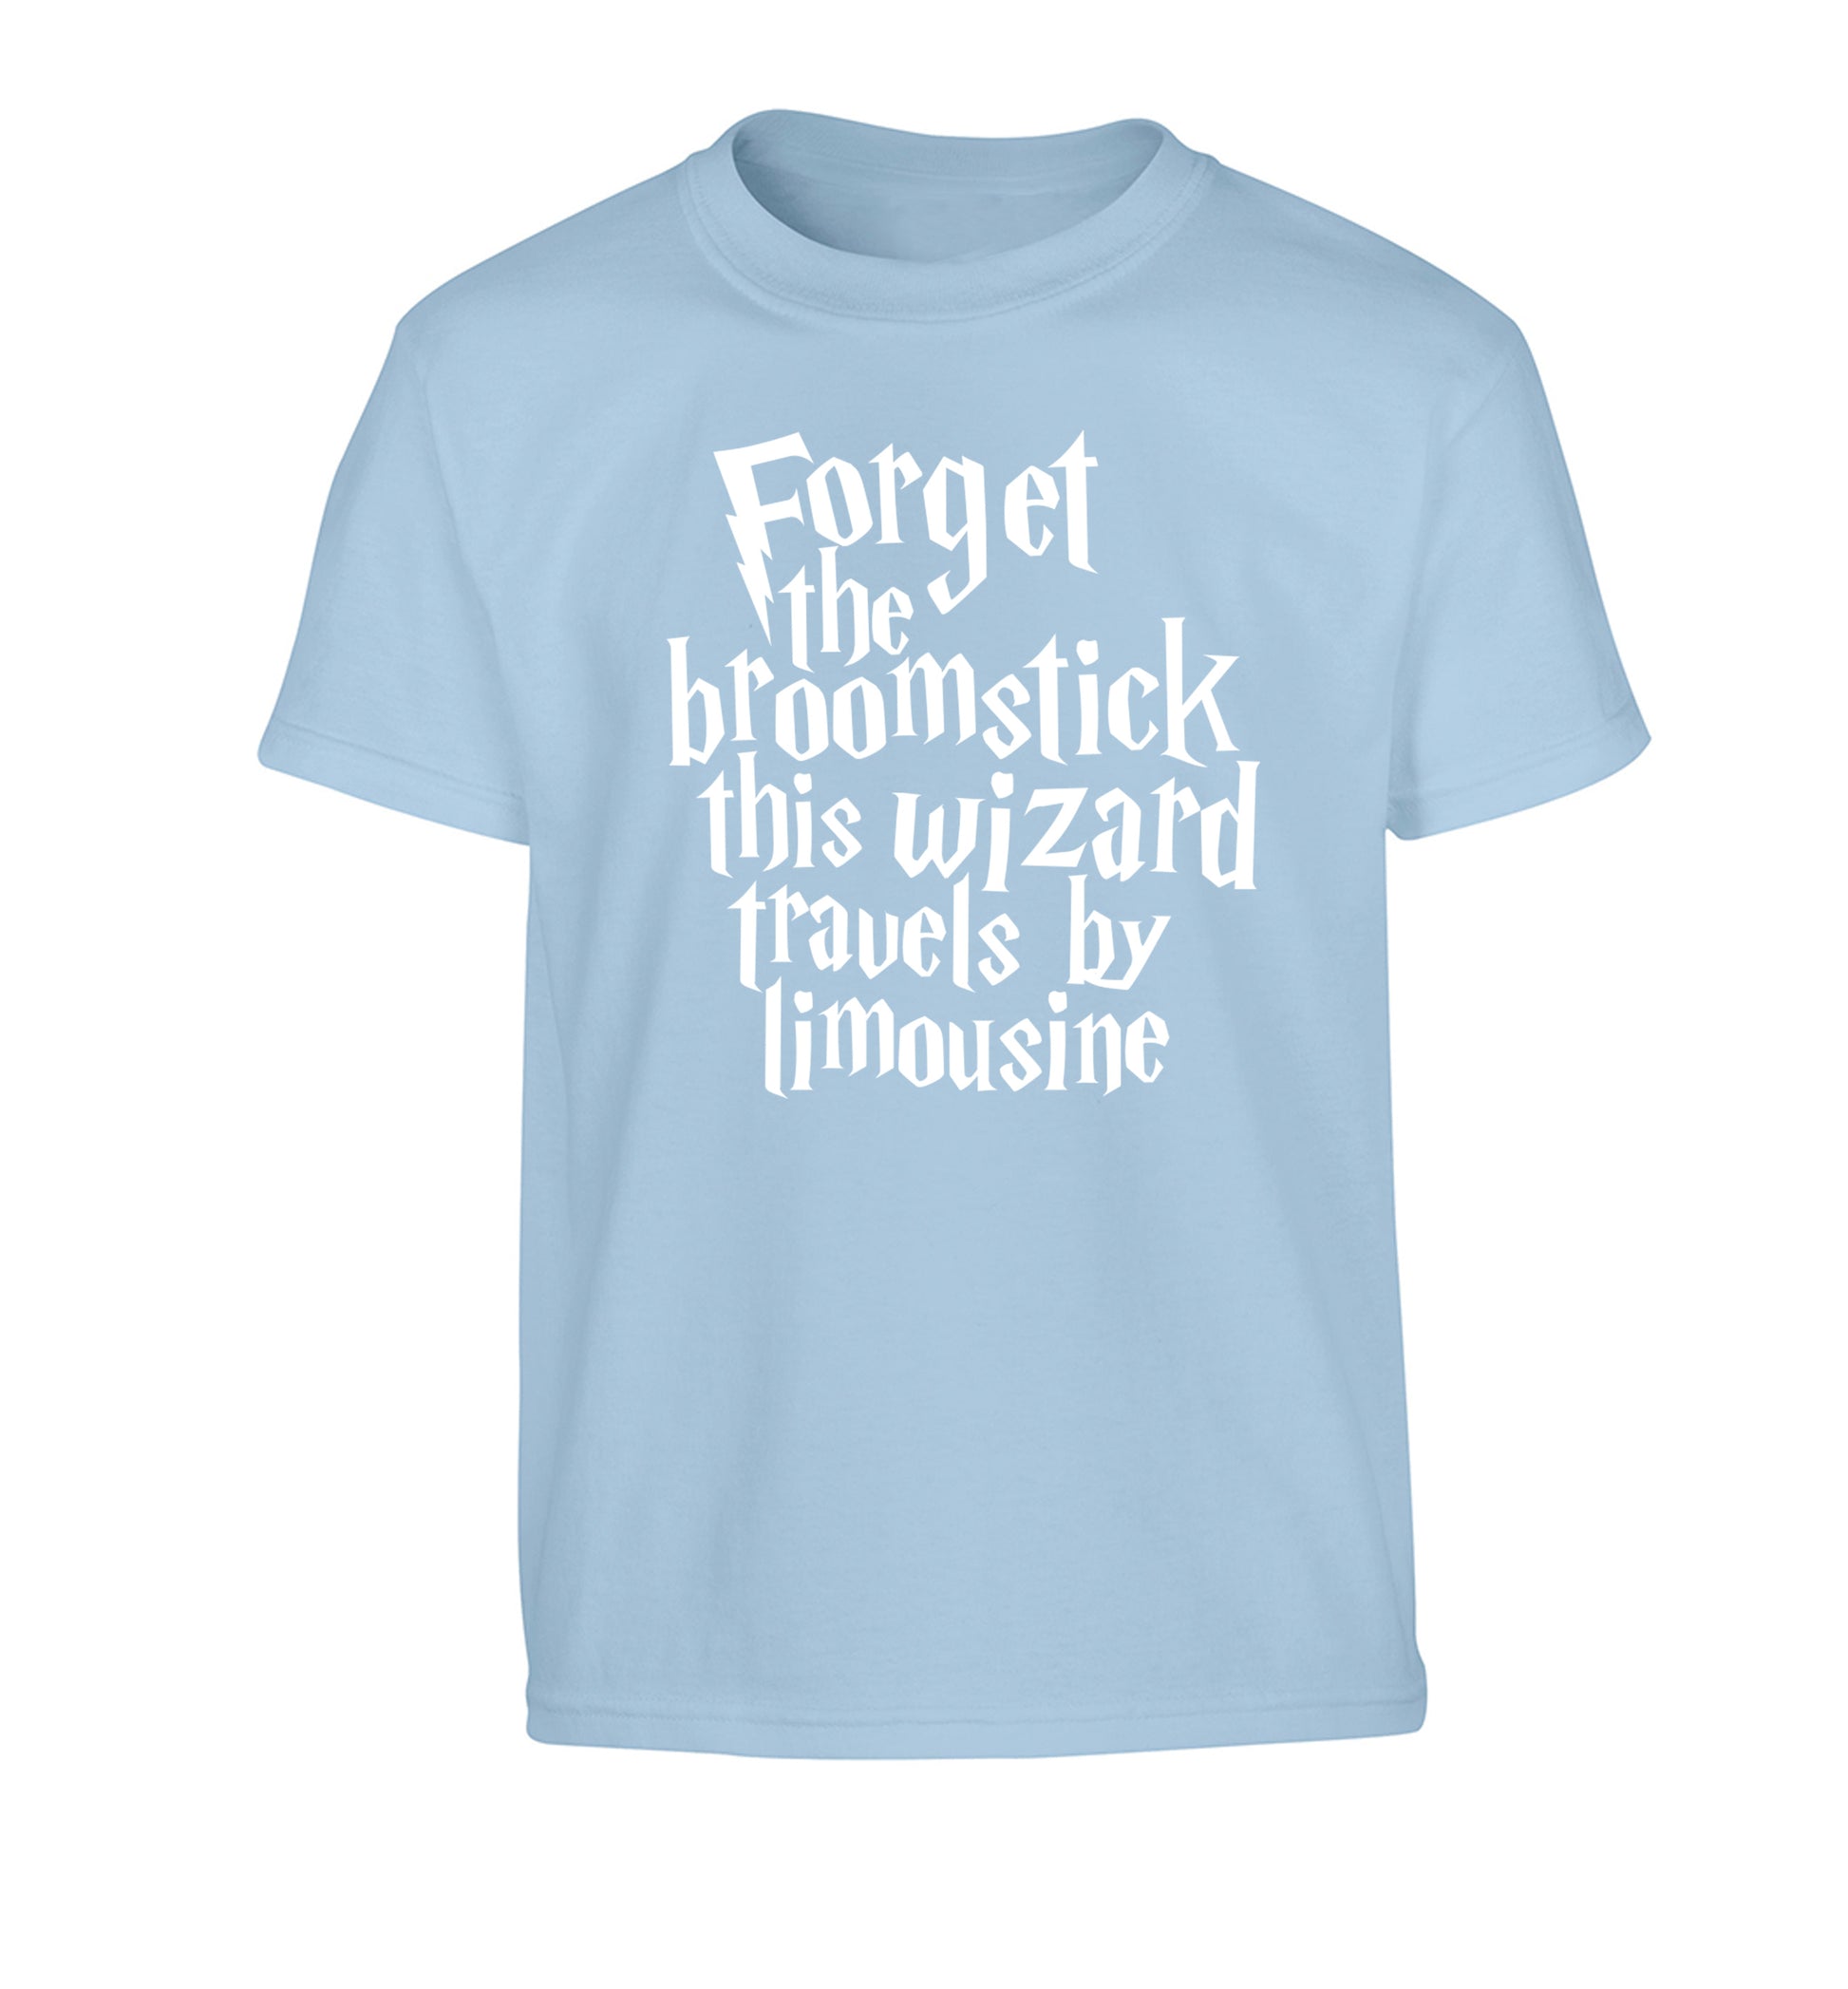 Forget the broomstick this wizard travels by limousine Children's light blue Tshirt 12-14 Years